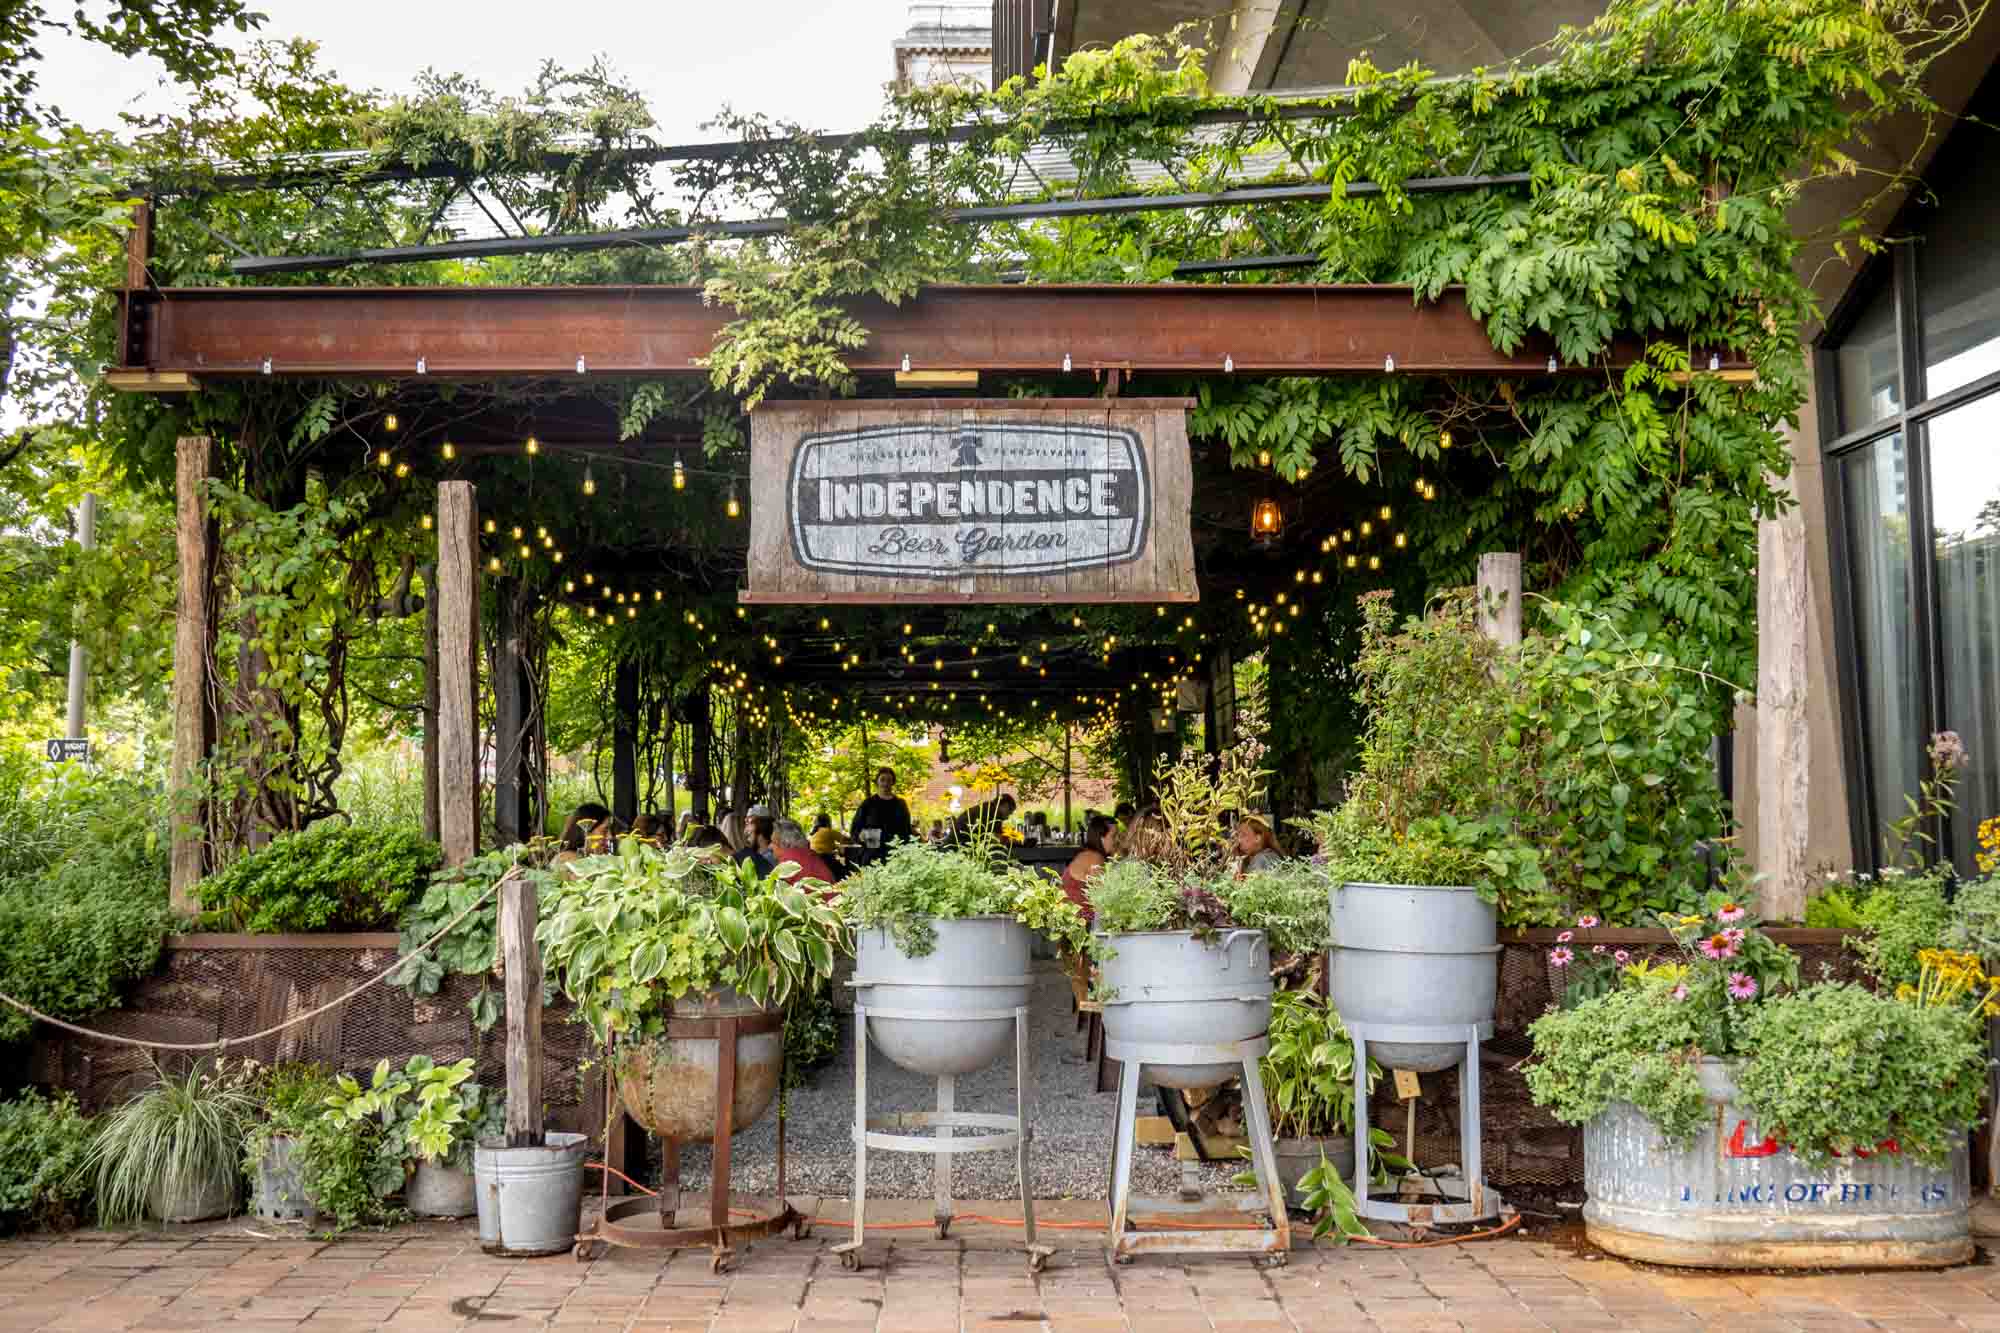 Outdoor seating area filled with plants and a sign: "Independence Beer Garden."